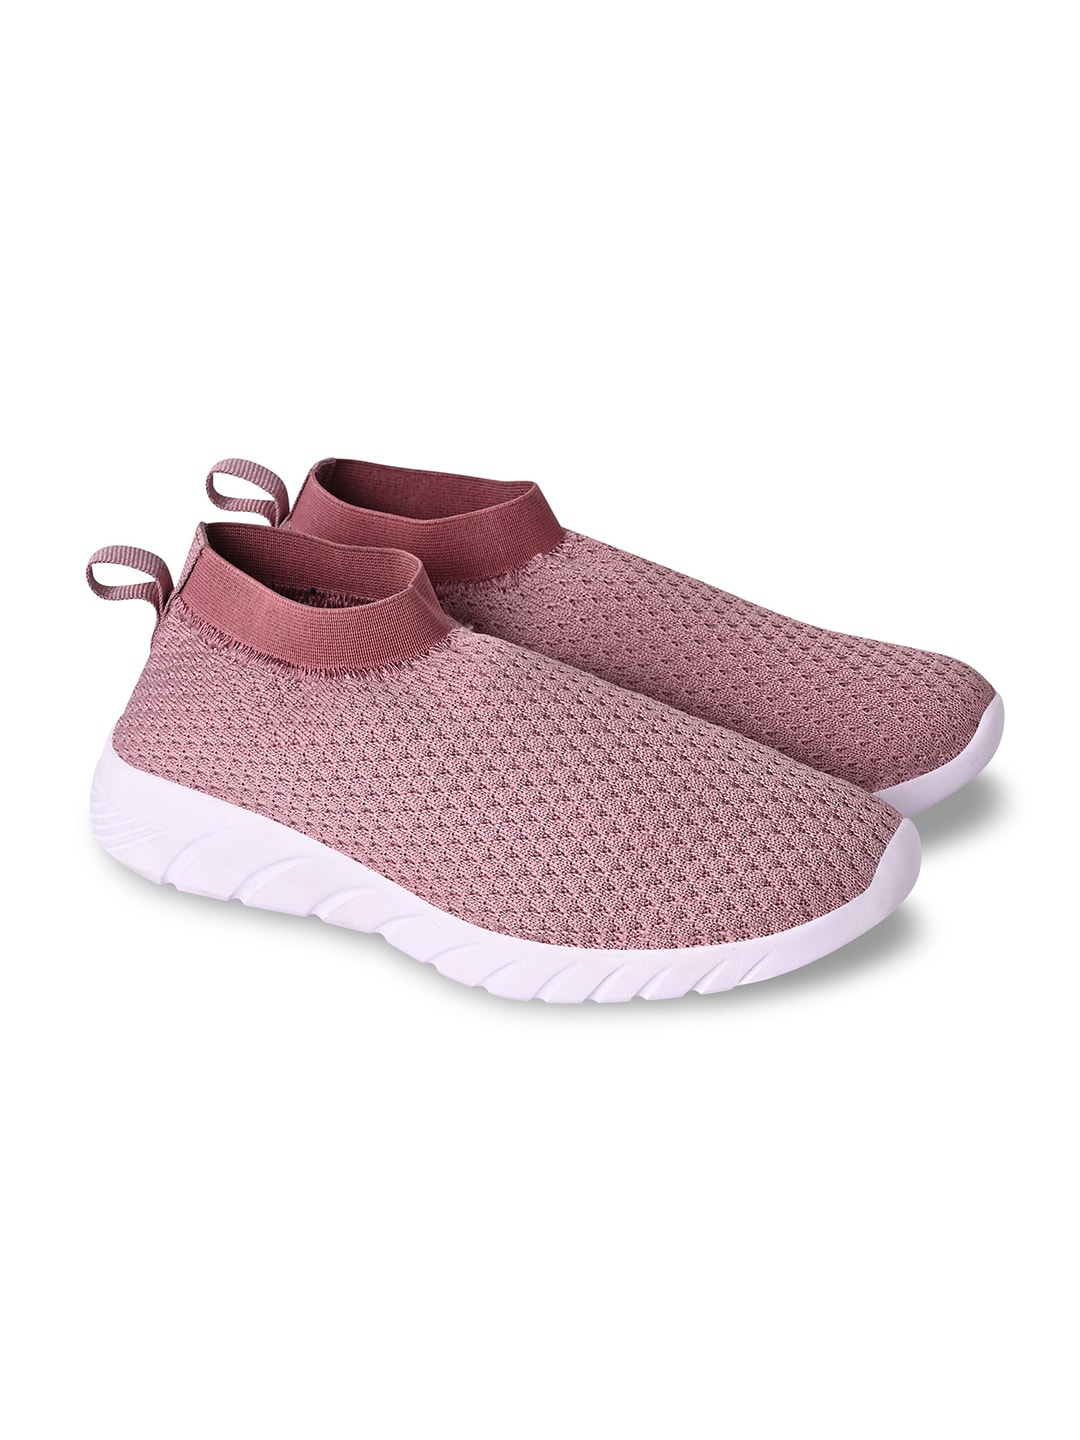 TPENT Women Rose Gold Mesh Running Non-Marking Slip On Shoes Price in India